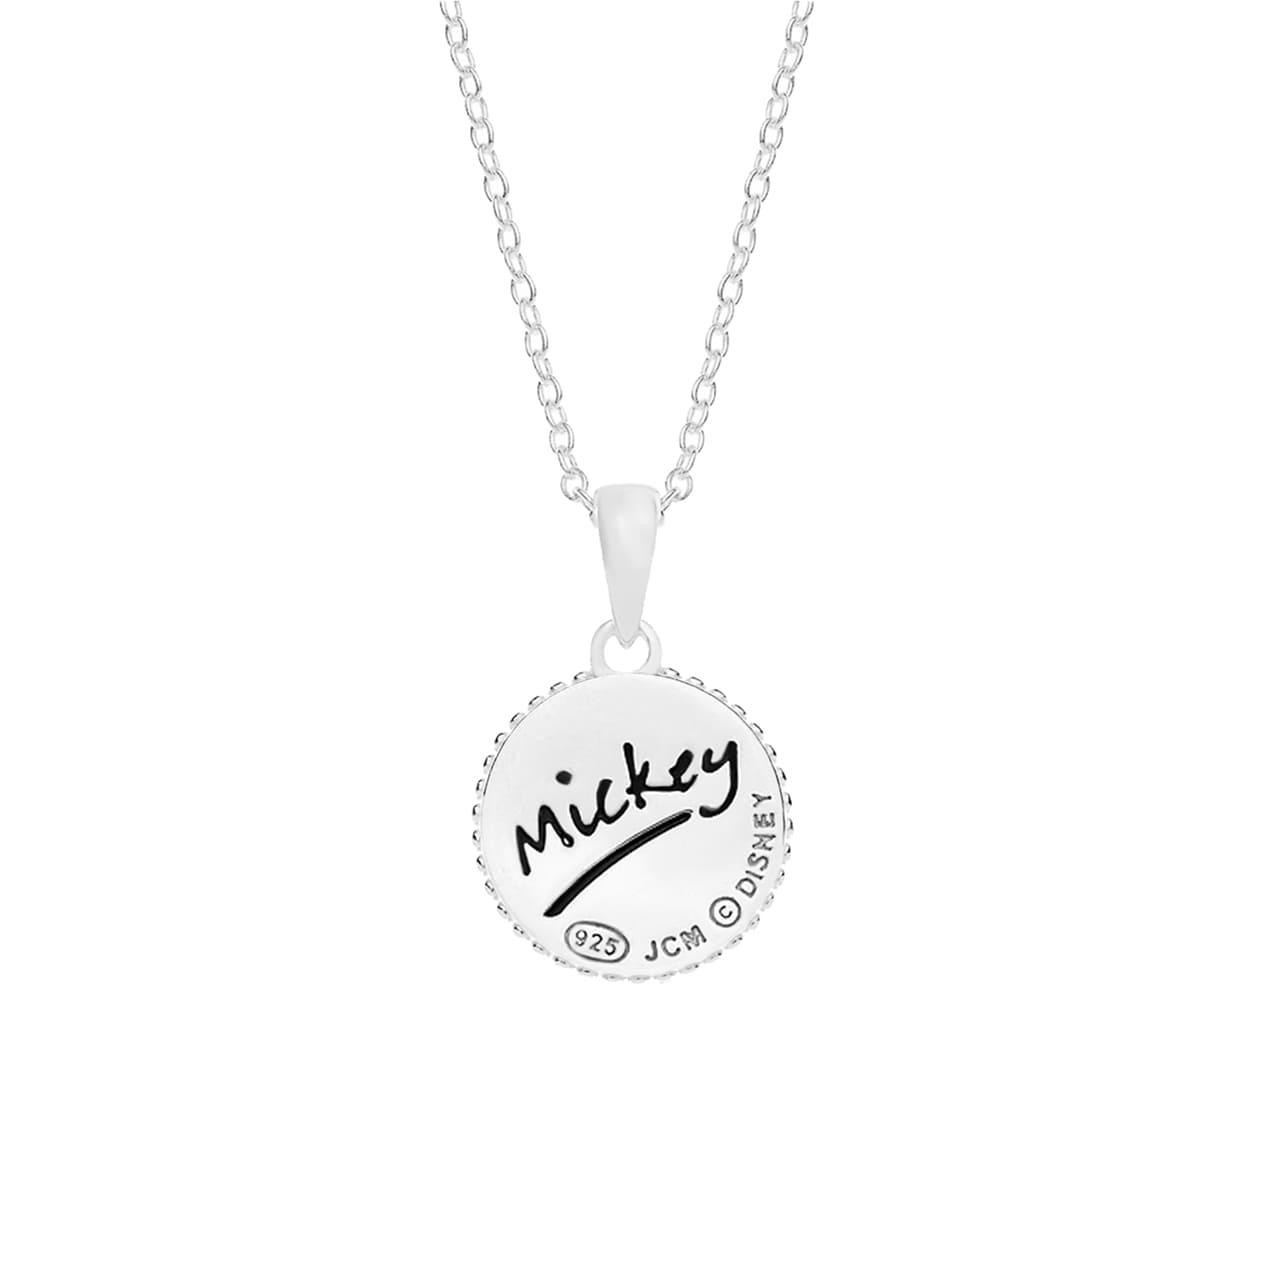 DISNEY© Iconic Mickey Mouse Necklace in Sterling Silver